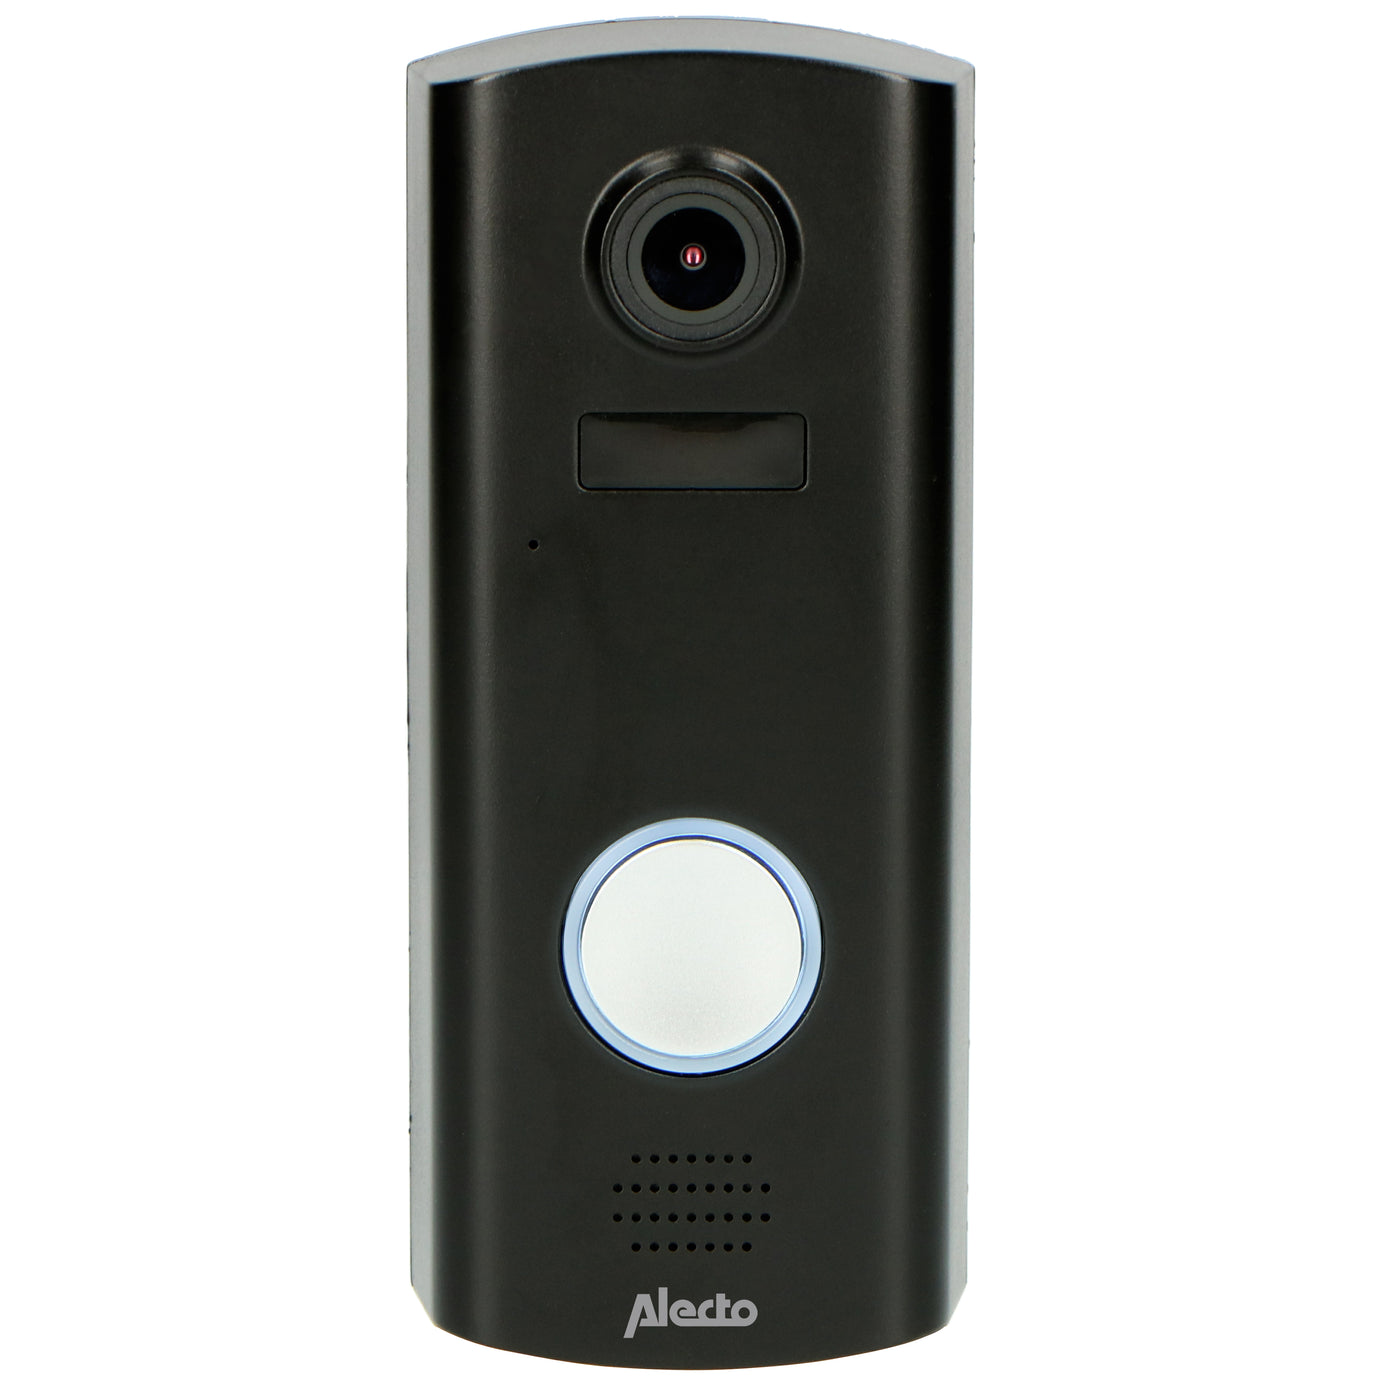 Alecto DVC600IP - Video doorbell with camera and Wi-Fi - Black